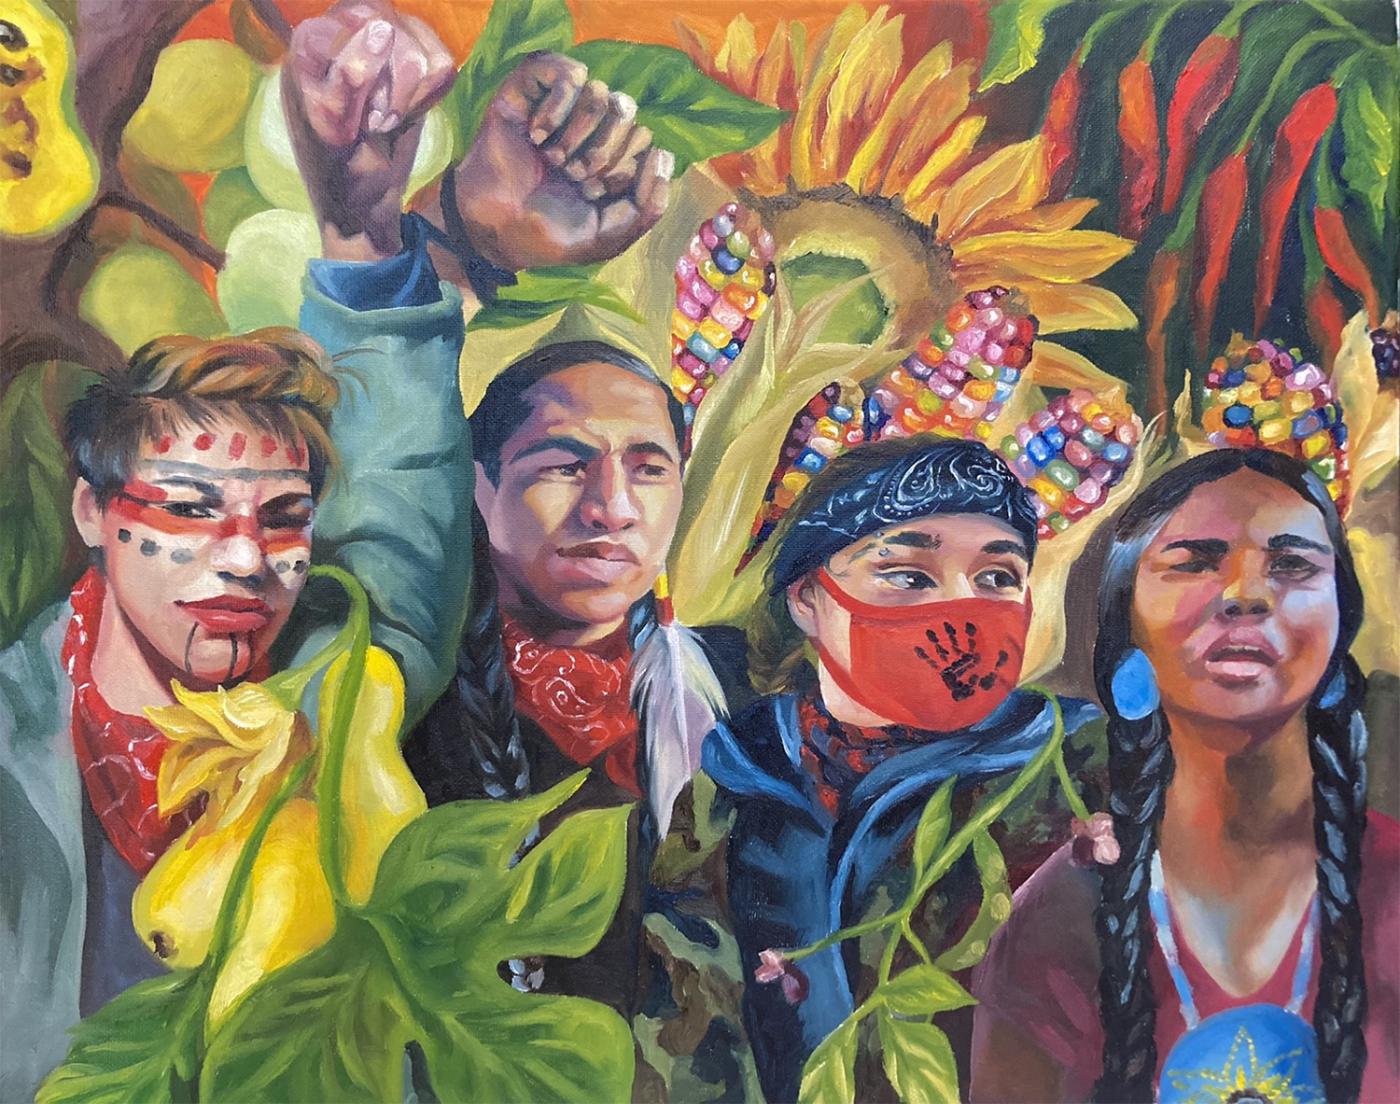 Portrait of four Indigenous youth shoulder-to-shoulder in front of a backdrop of native plants including rainbow corn, peppers, and sunflowers.